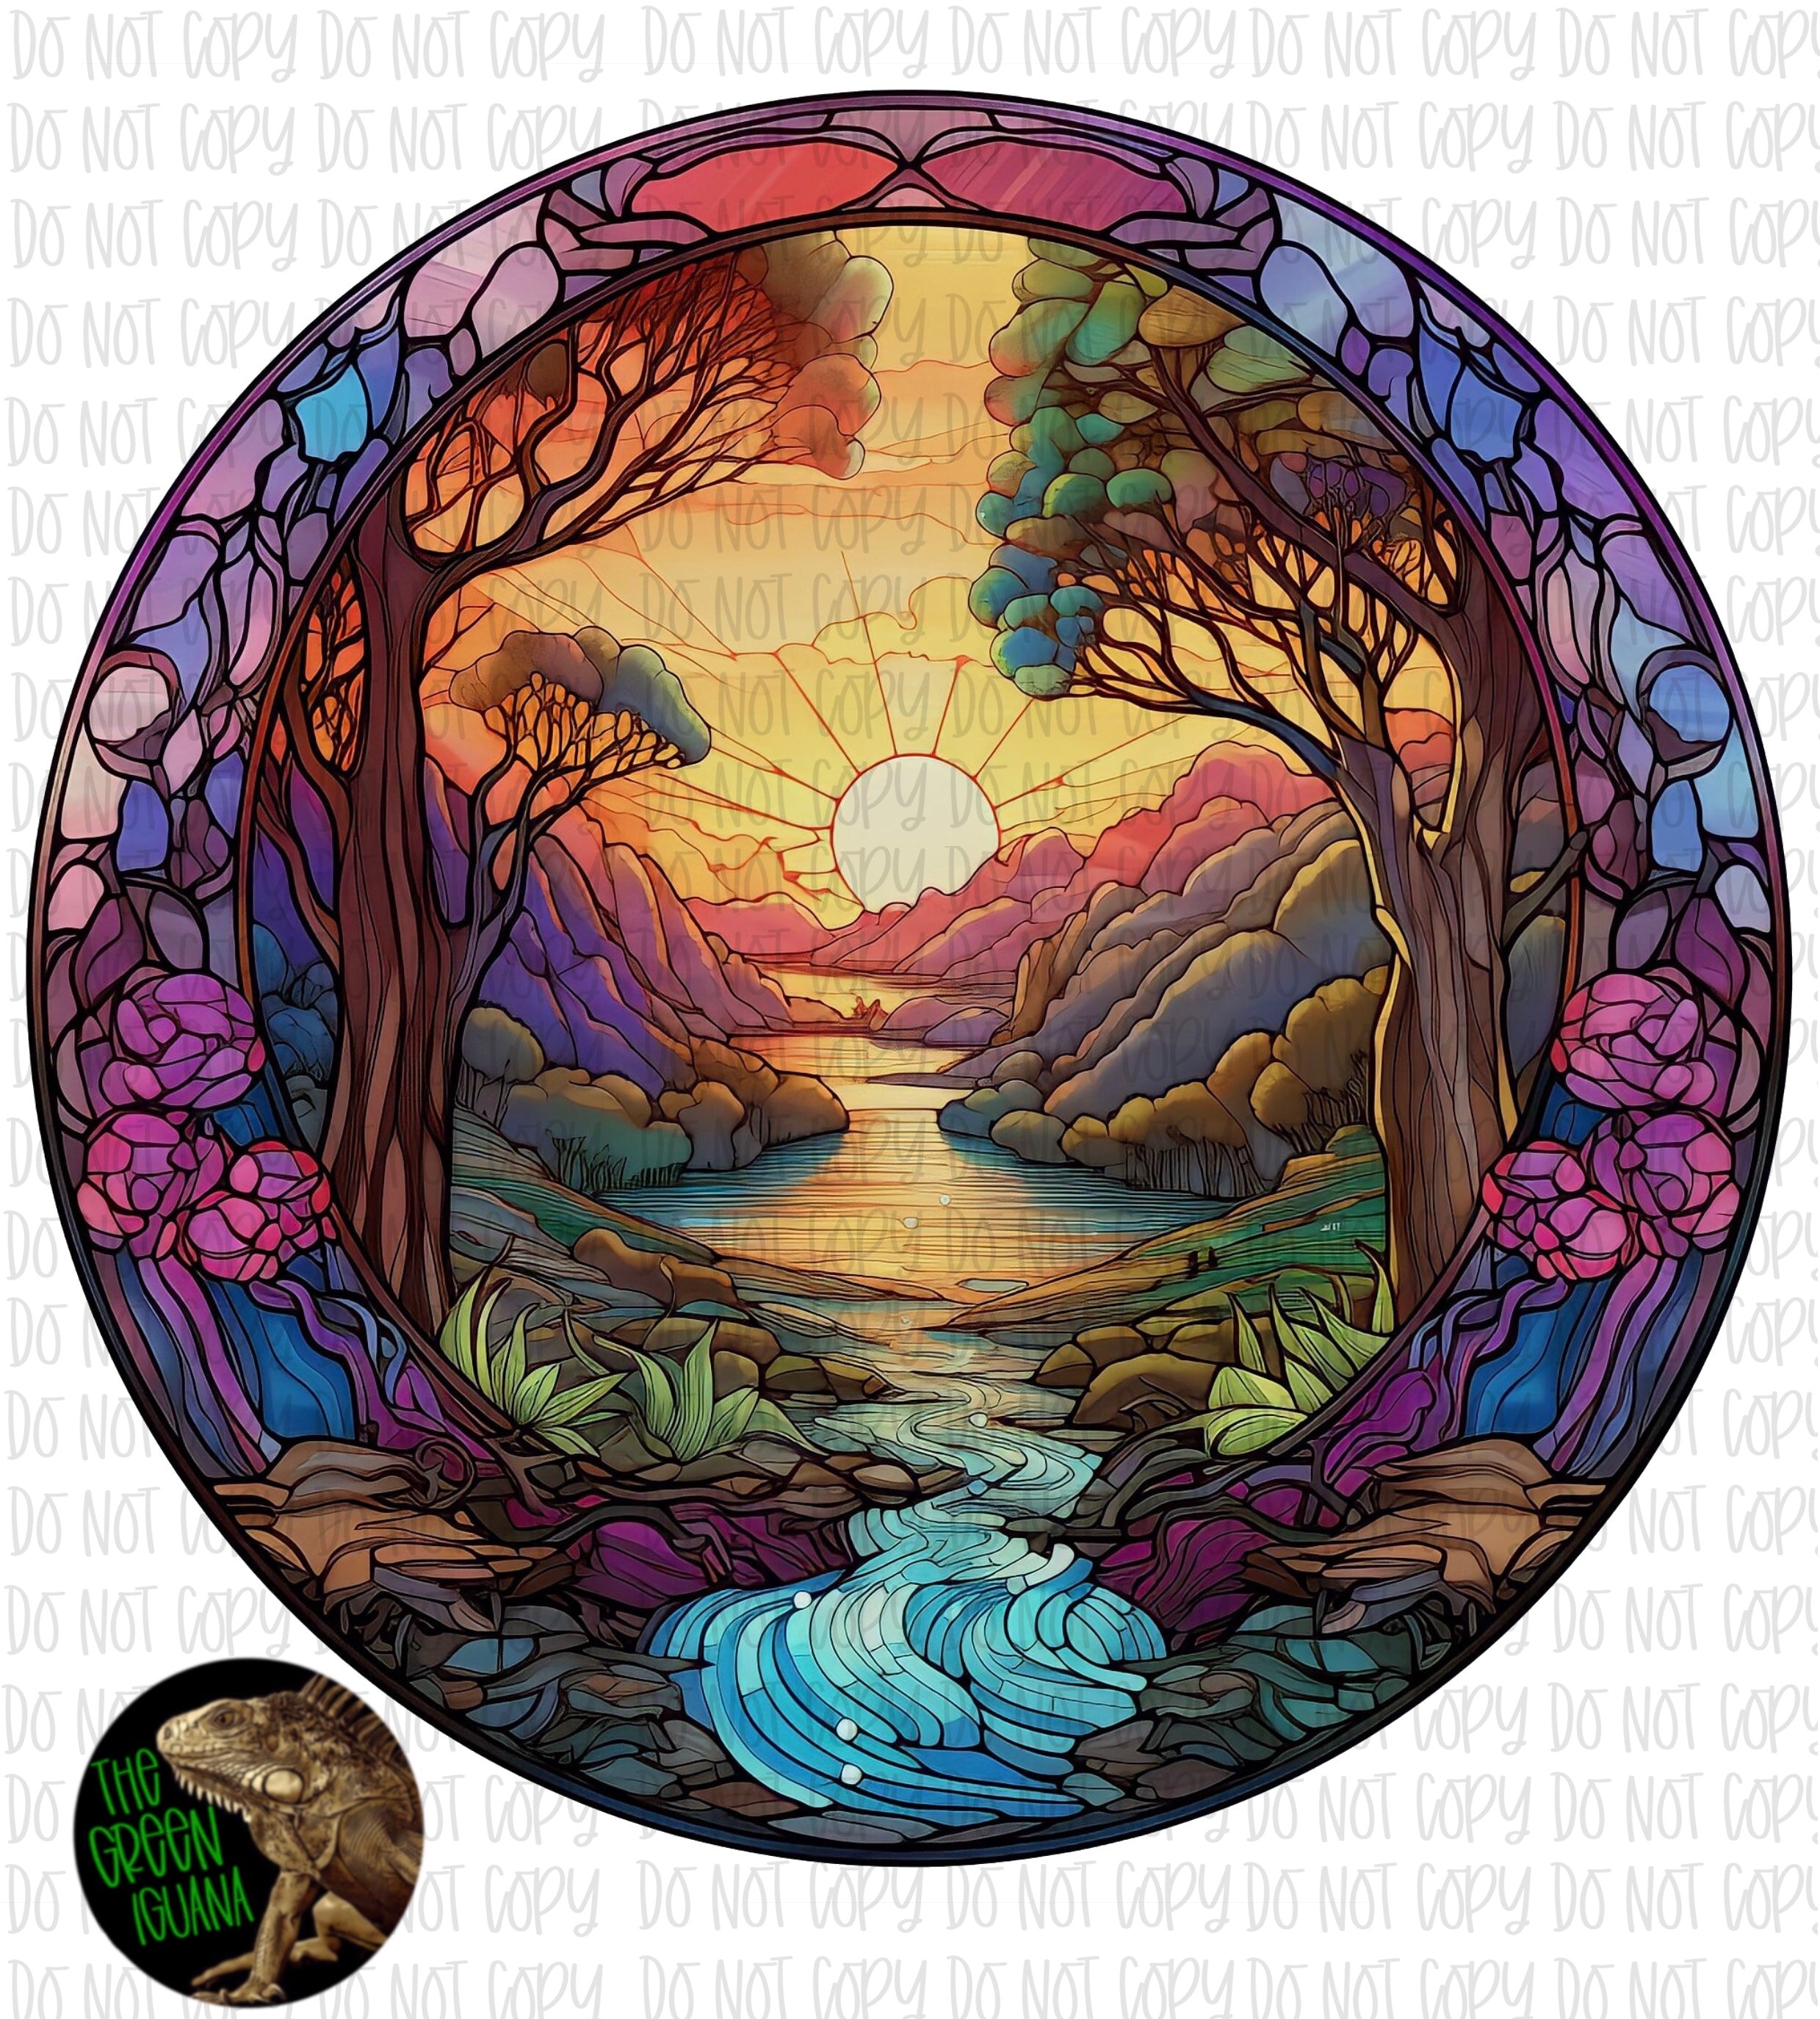 Stained glass river & tree scenery - DIGITAL